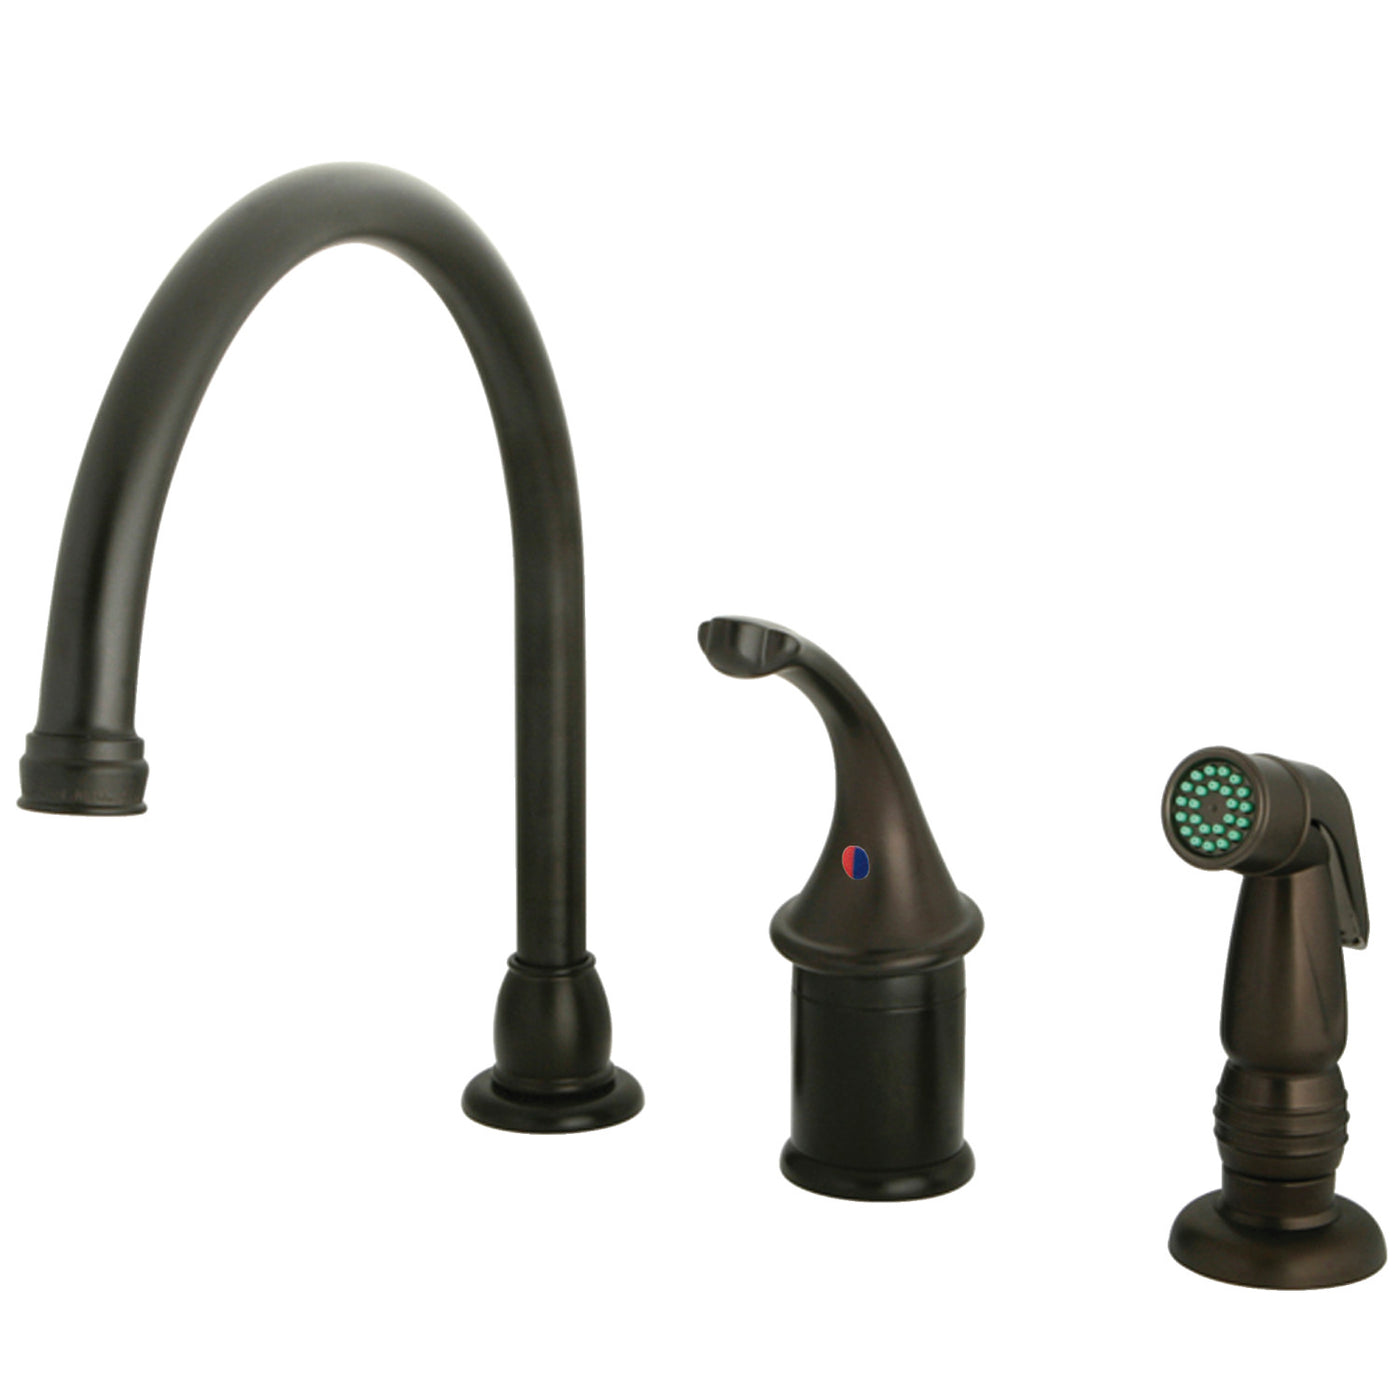 Elements of Design EB3815GLSP Single-Lever Widespread Kitchen Faucet with Plastic Sprayer, Oil Rubbed Bronze